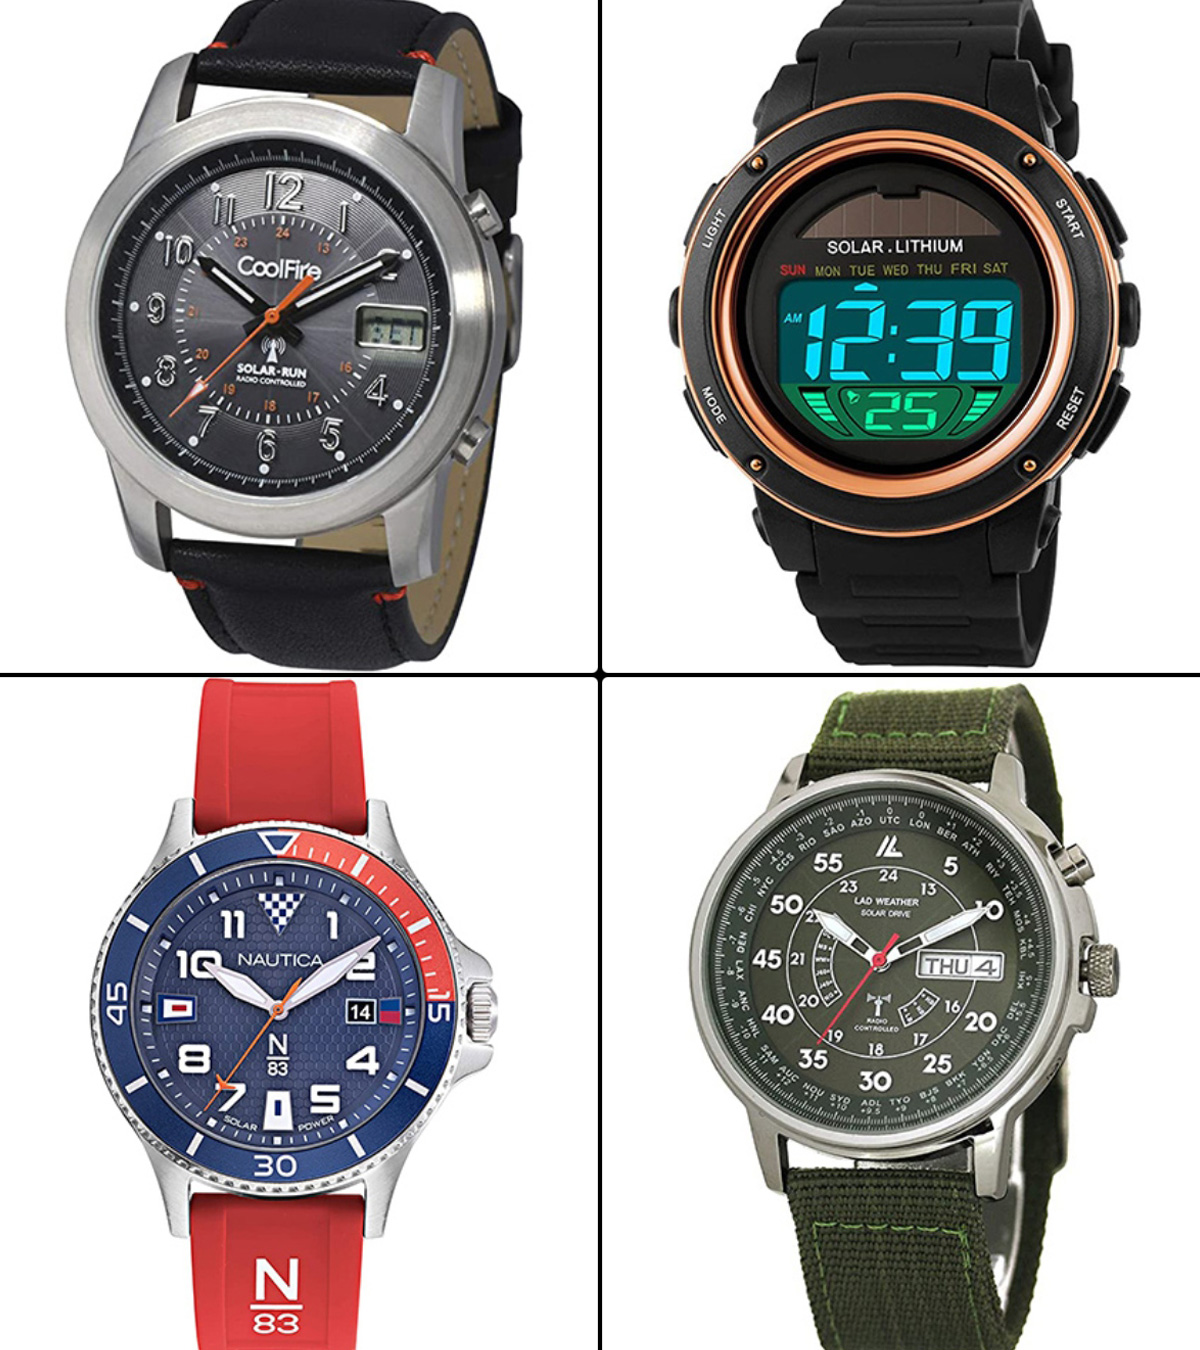 11 Best Solar Atomic Watches For Women & Men: Buying Guide 2023